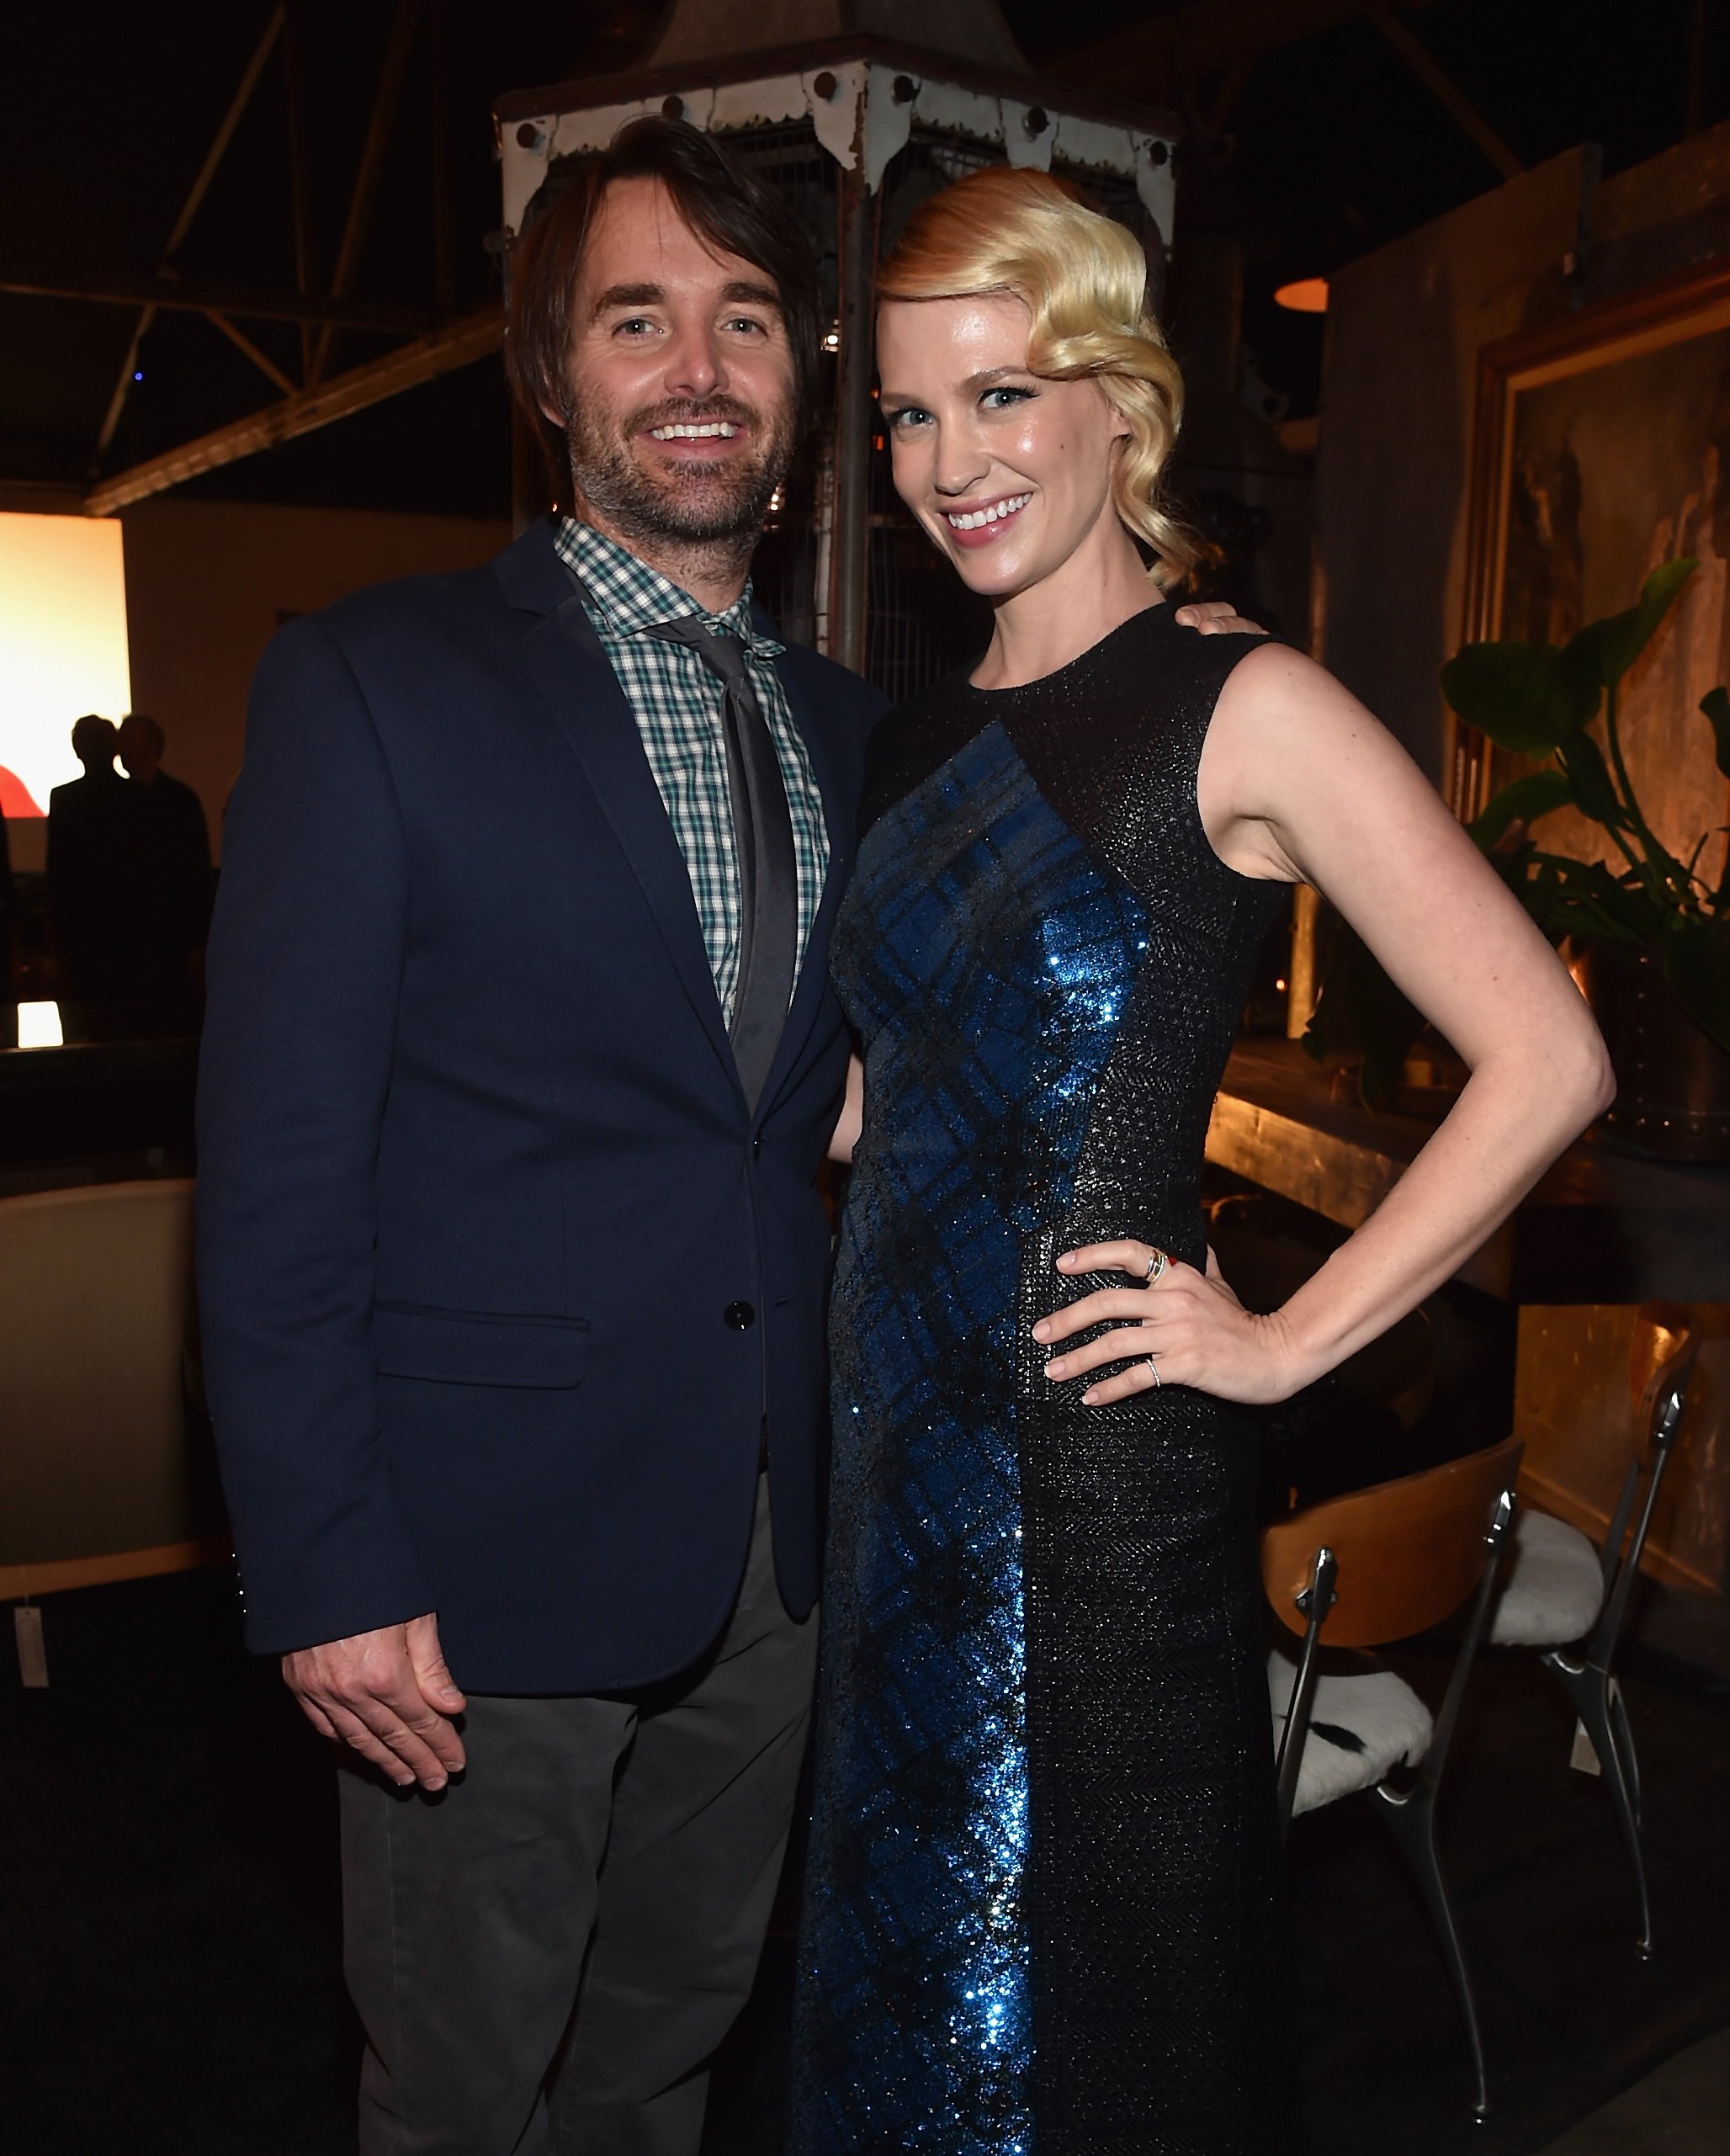 Will Forte and January Jones at the after party for the premiere of "The Last Man On Earth" on February 24, 2015, in California | Source: Getty Images